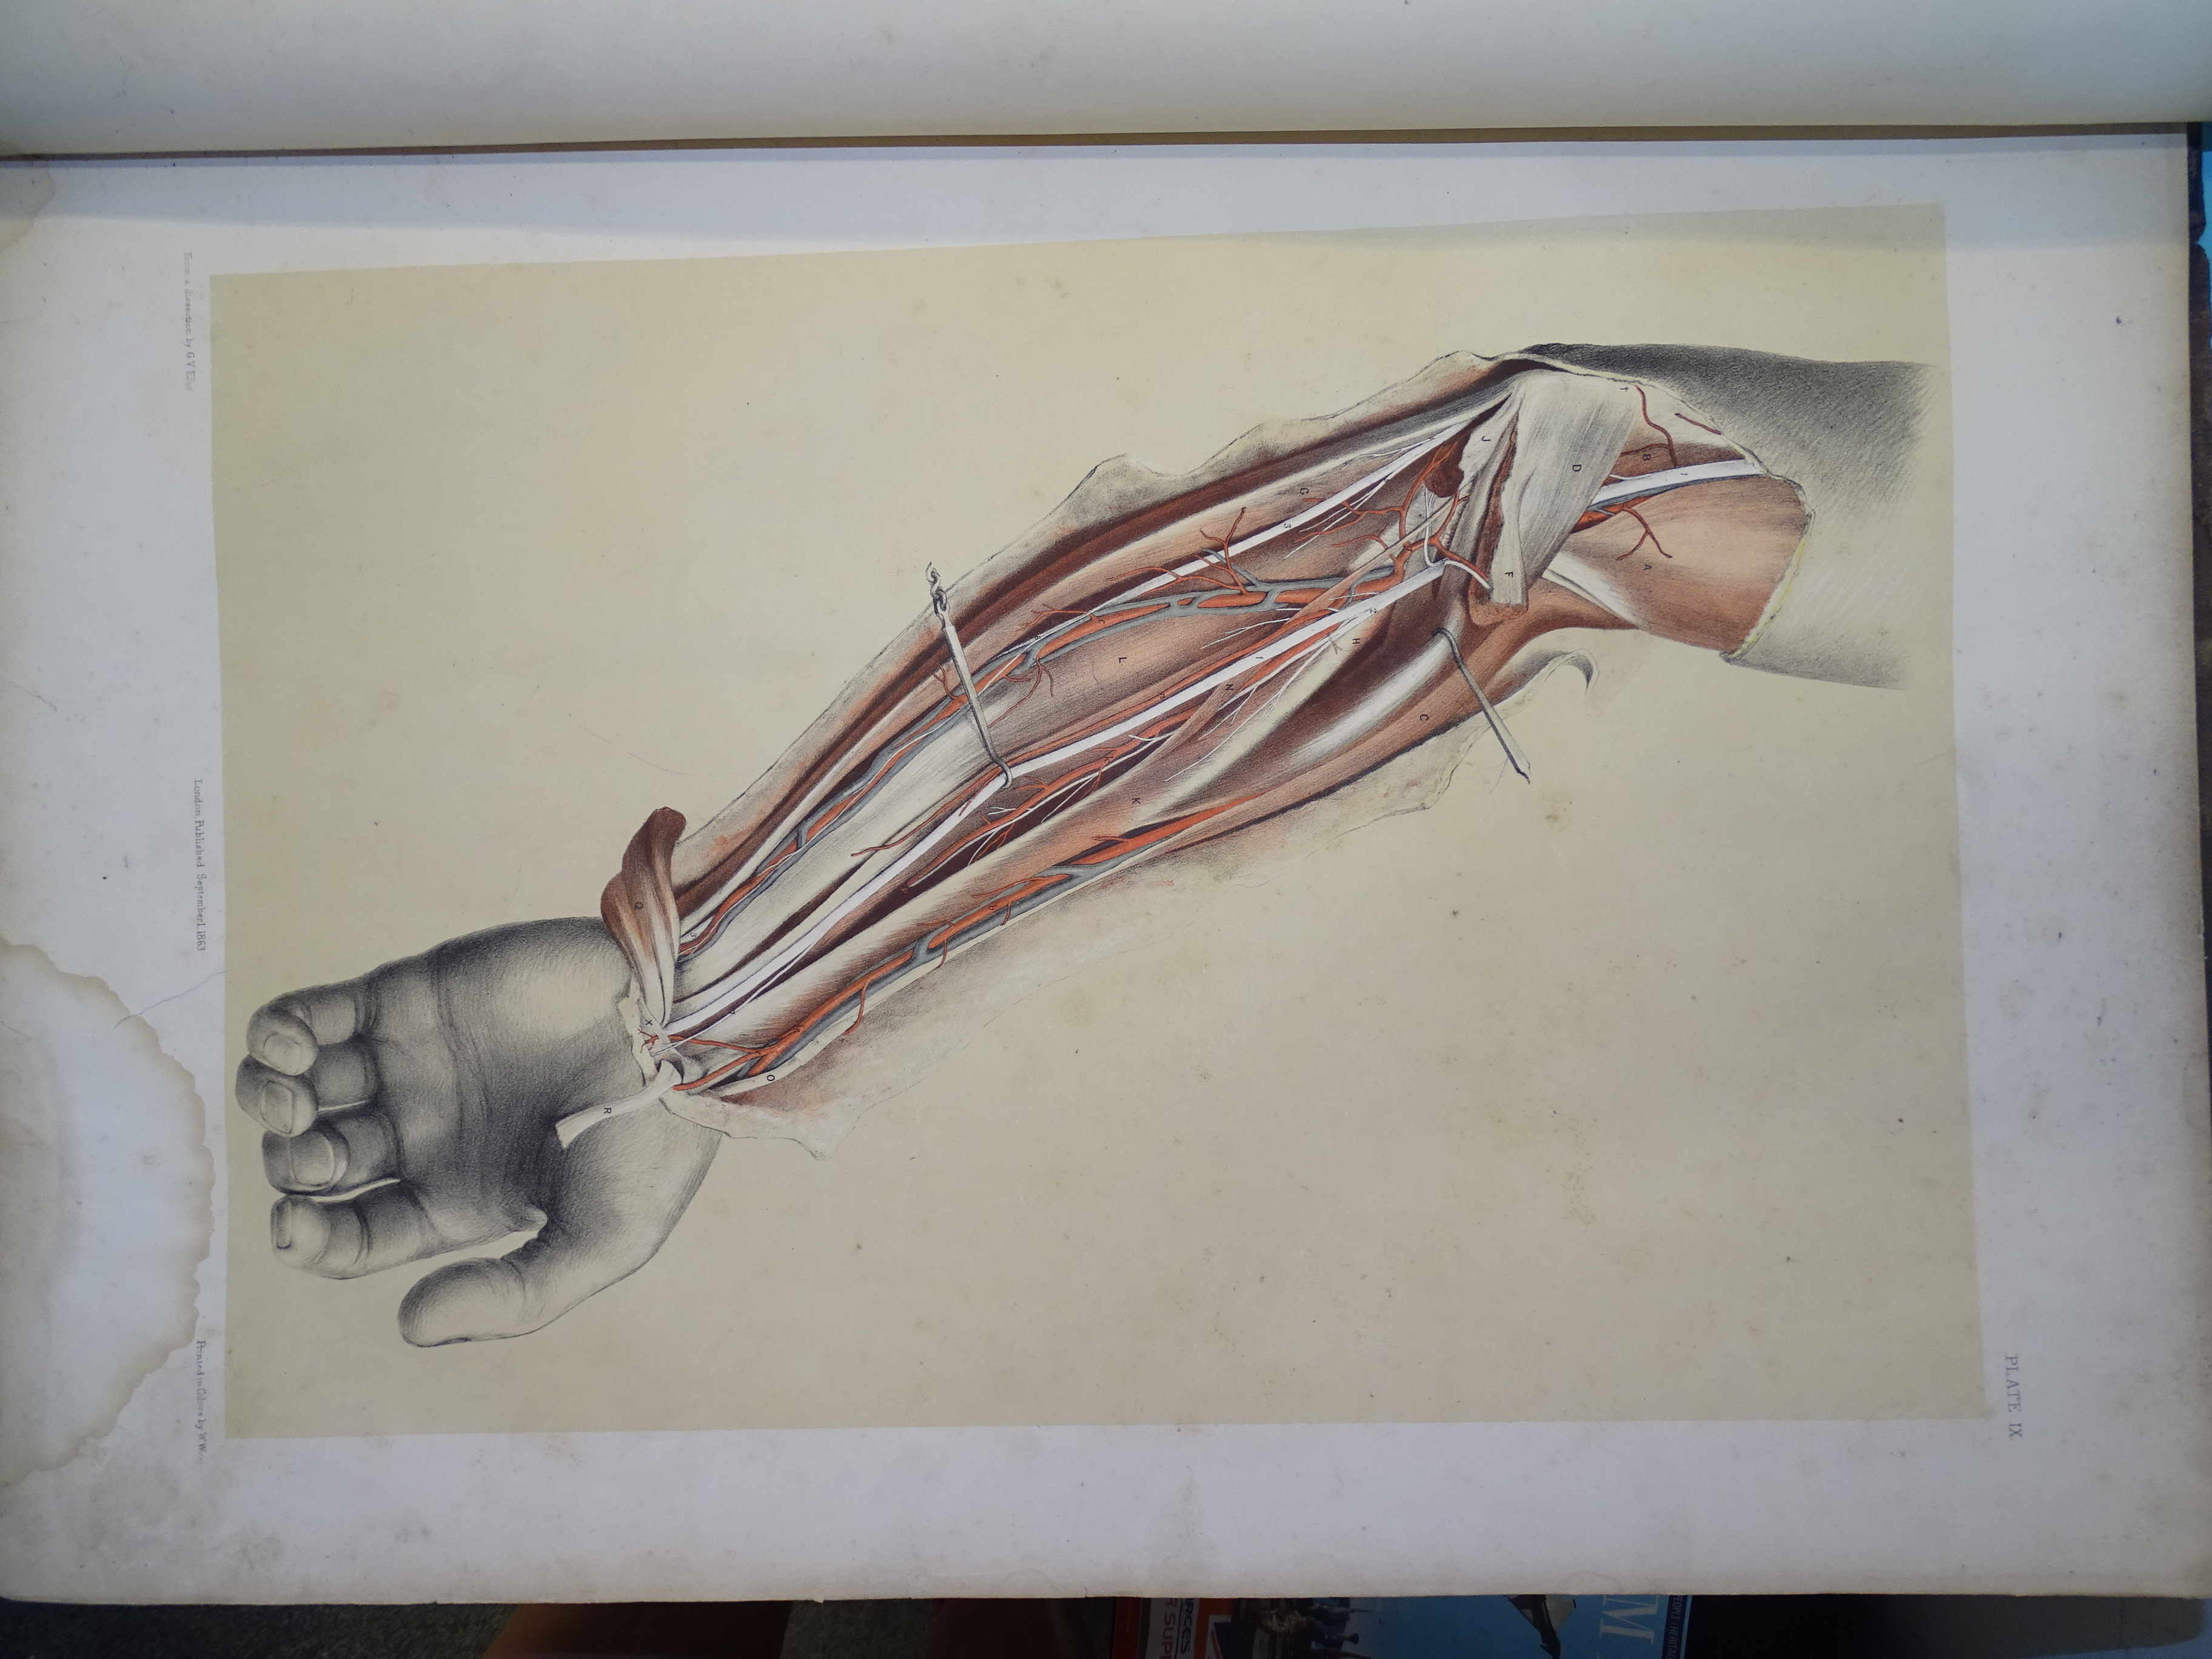 Ellis (George Viner) & Ford (G H), Illustrations of Dissections in a Series of Original Coloured - Image 4 of 9